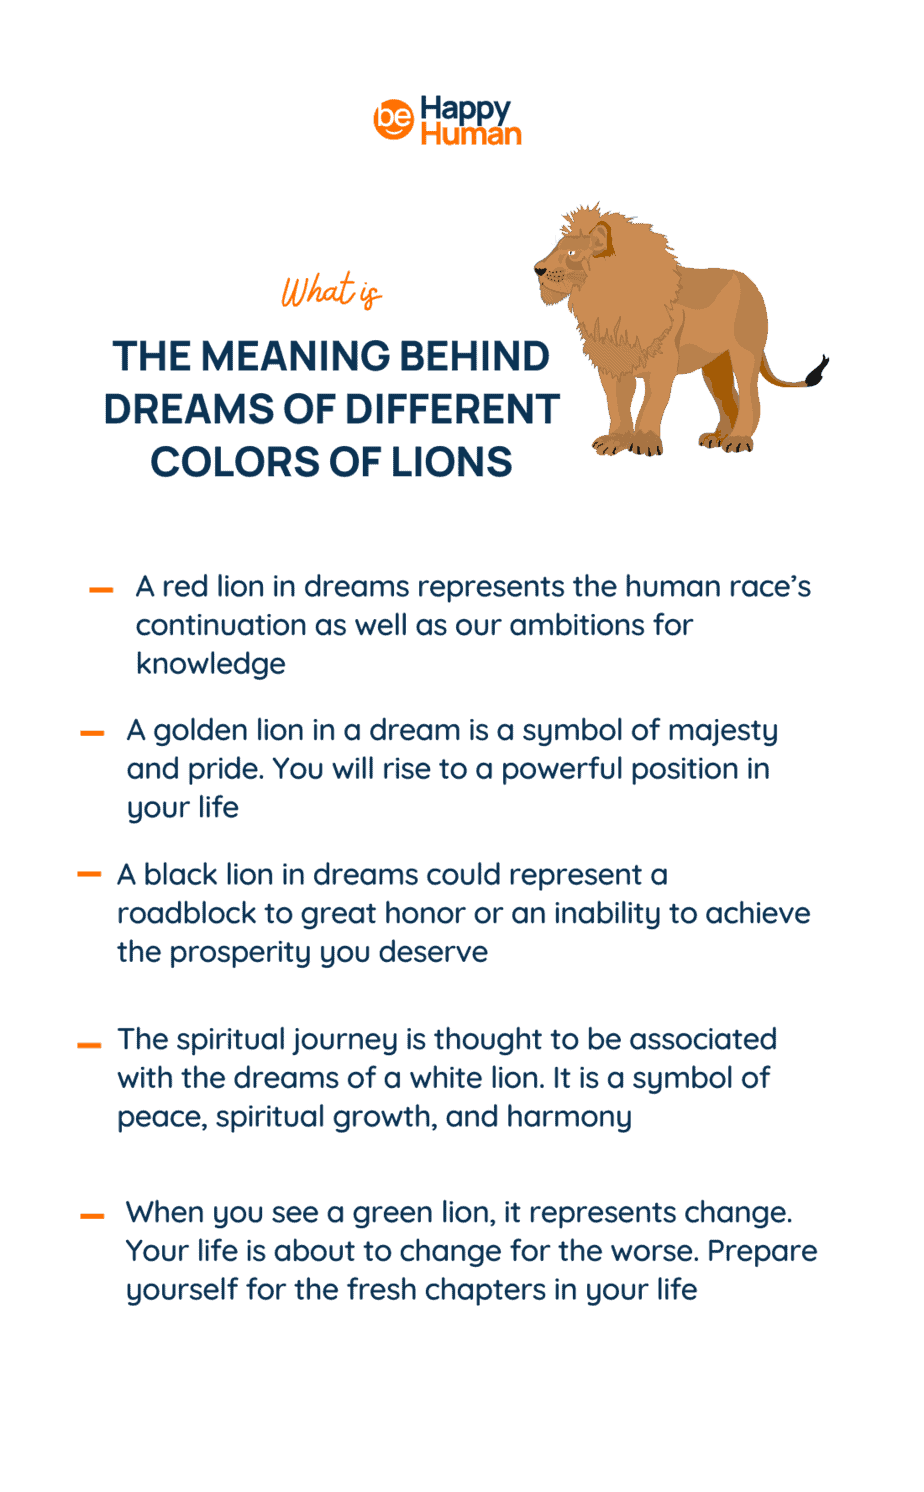 What Does It Mean To Dream Of A Lion?